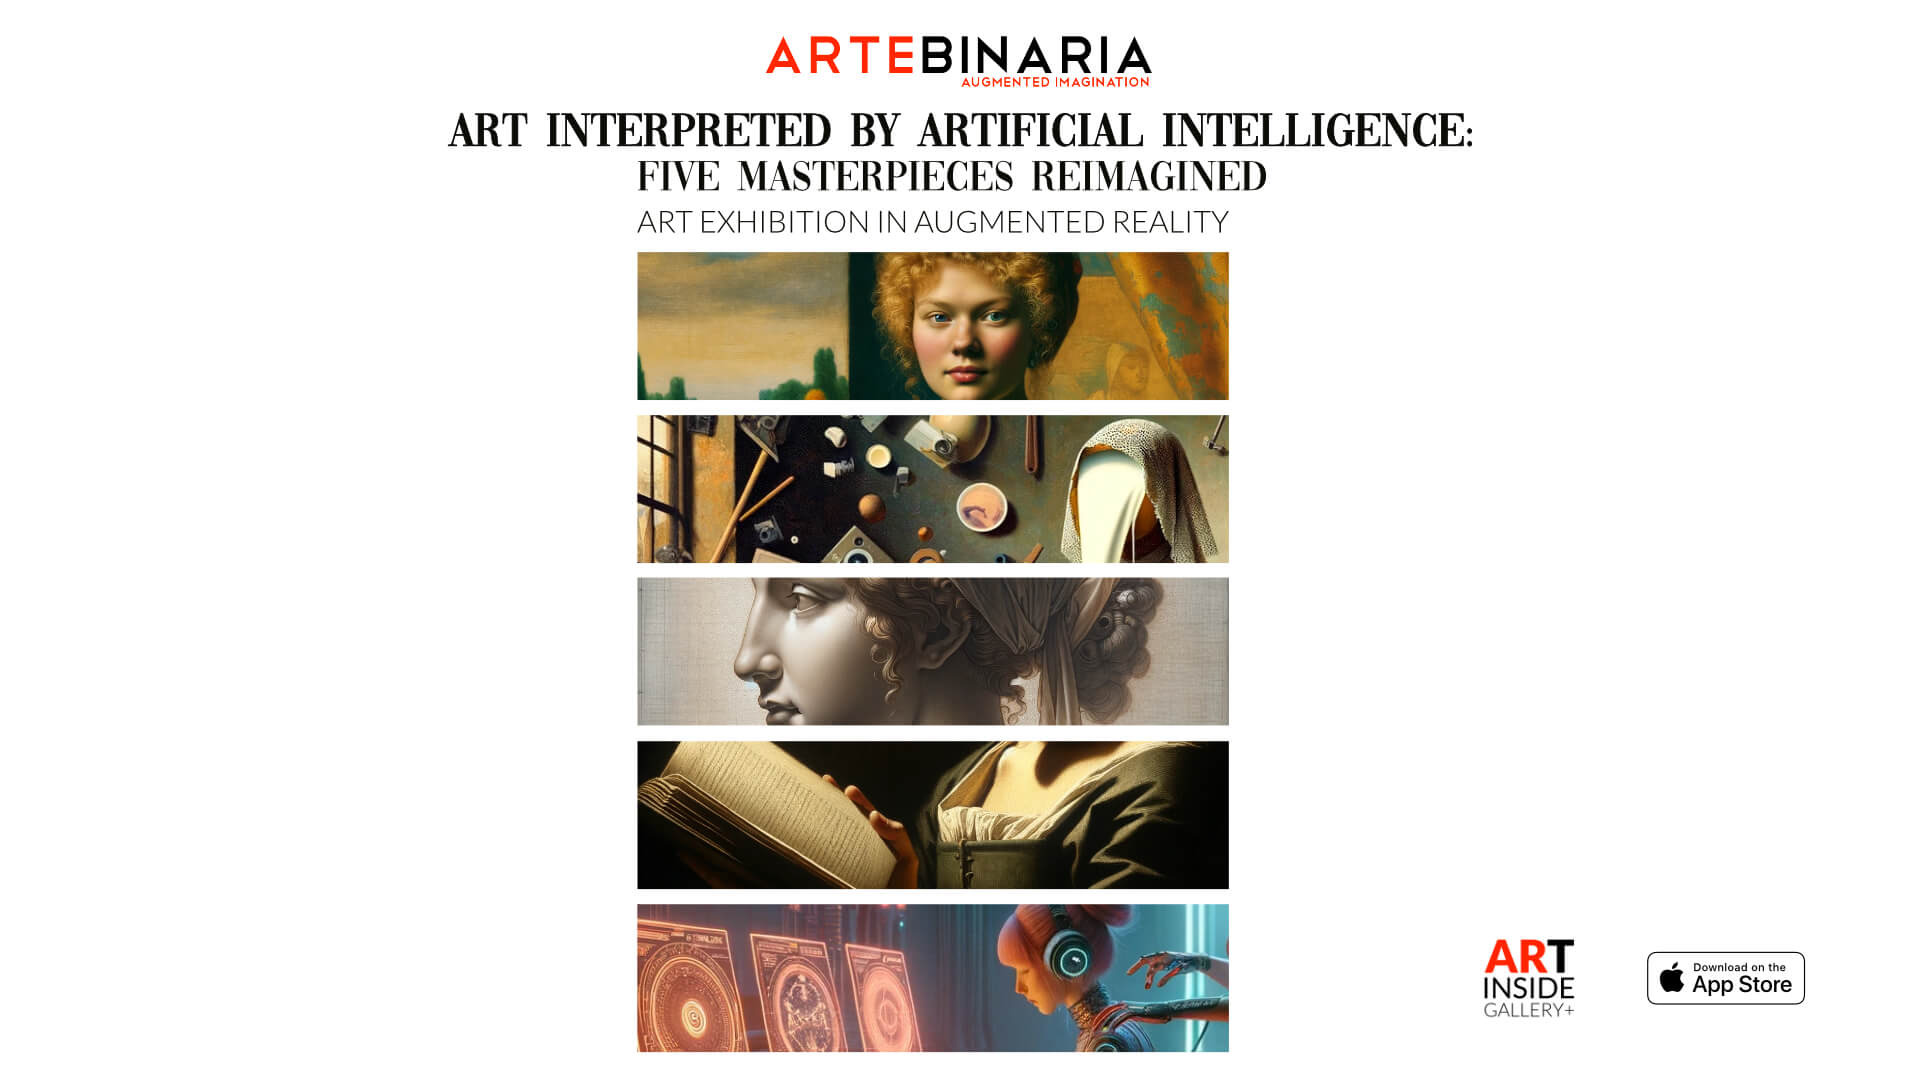 Five Masterpieces Reimagined by AI